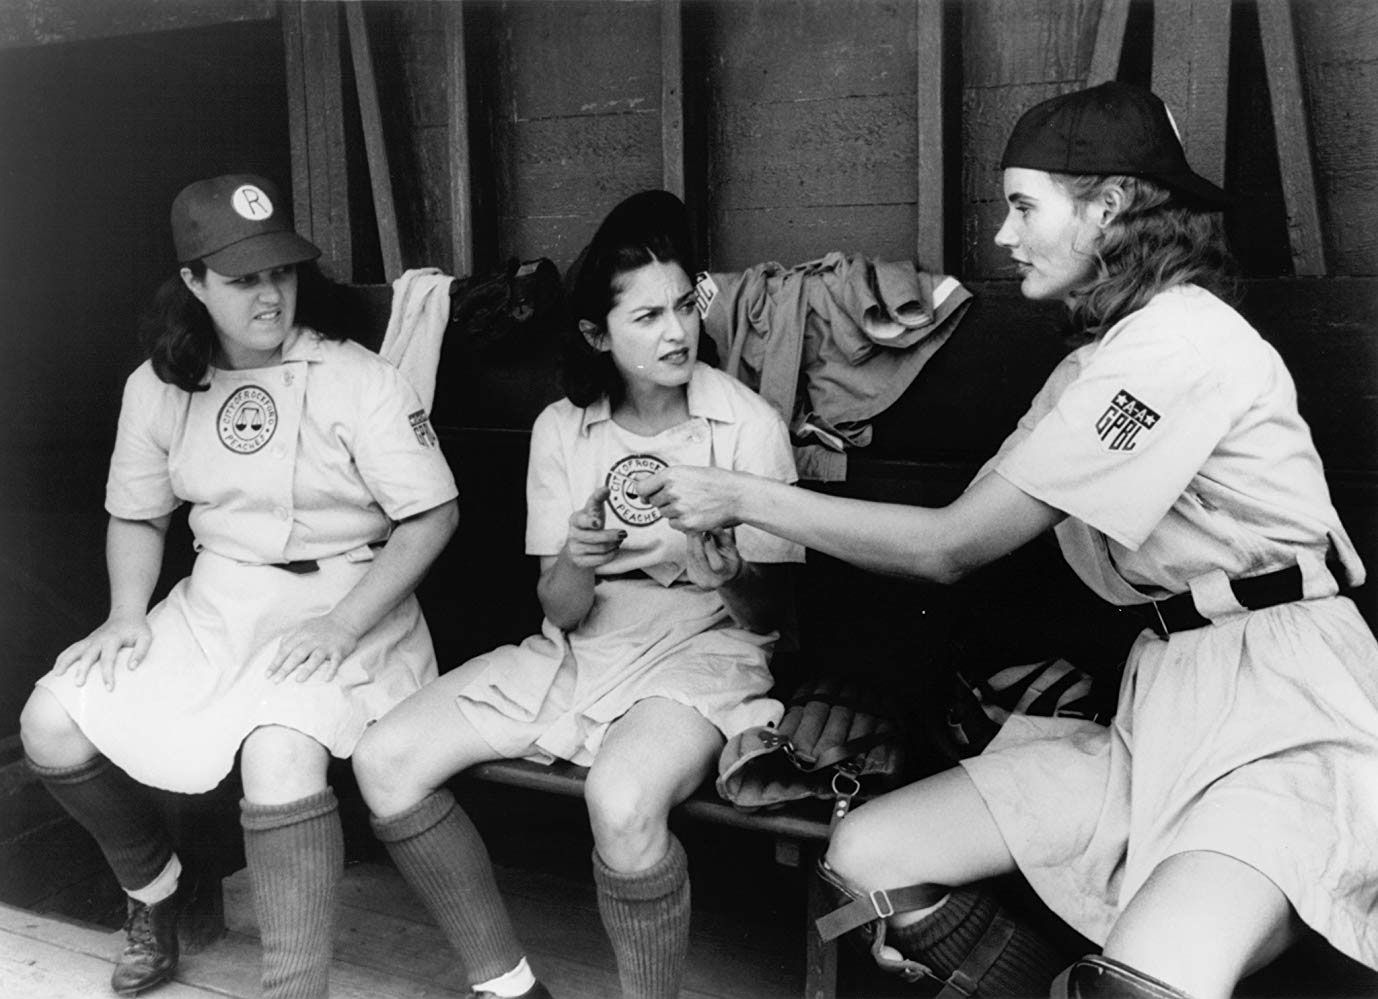 A League of Their Own Taught Me About Feminism